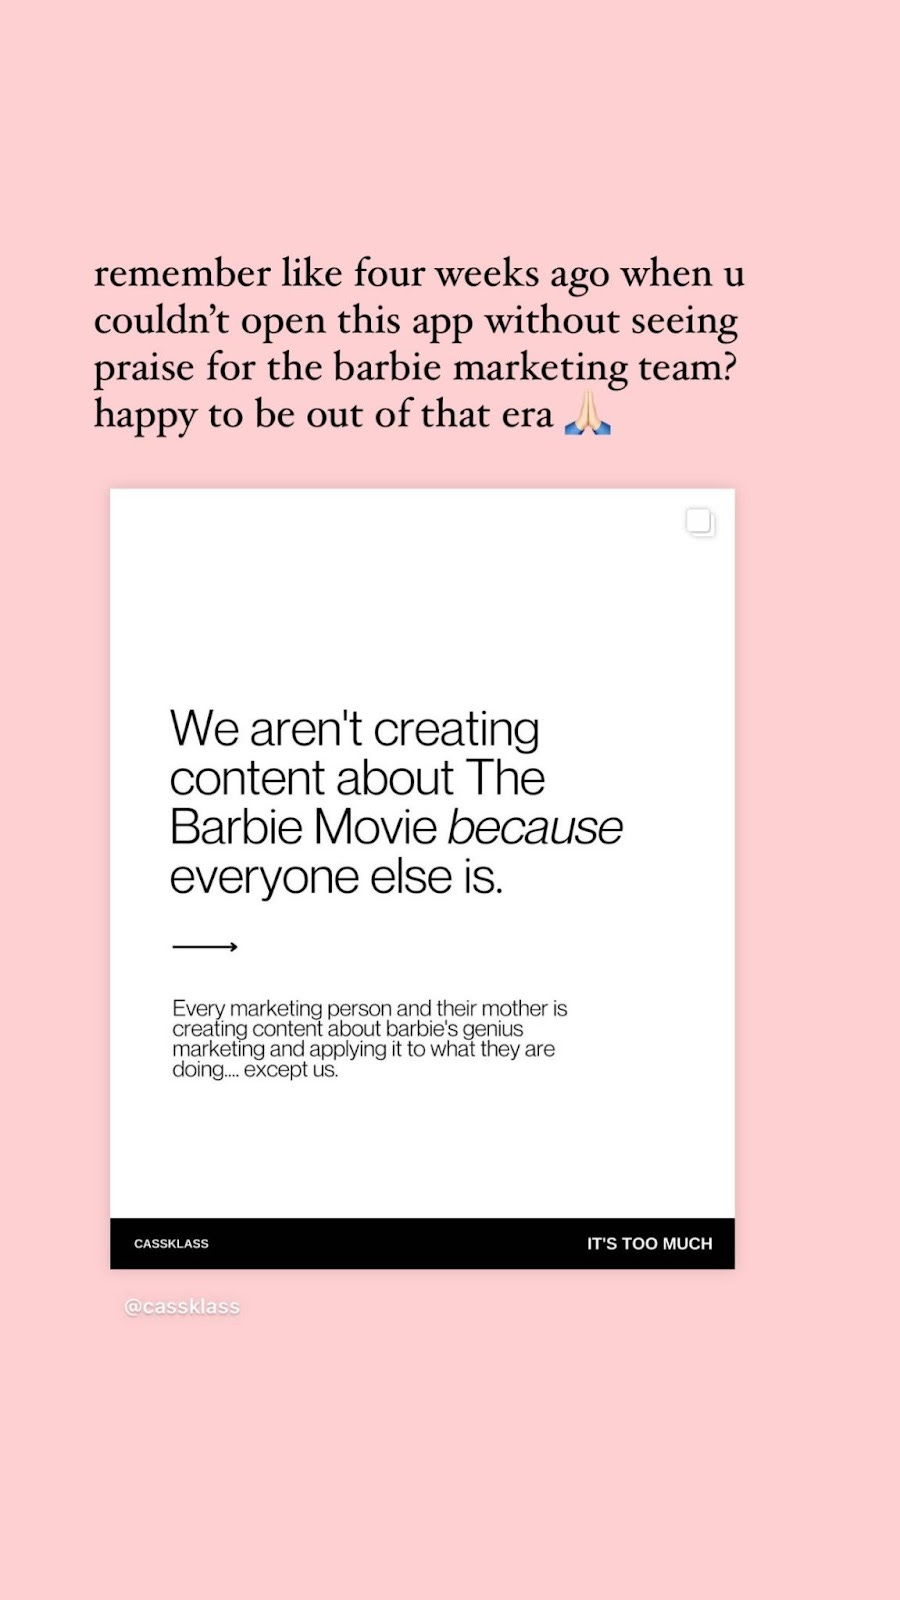 A post from @cassklass that reads “We aren’t creating content about the Barbie Movie because everyone else is. Every marketing person and their mother is creating content about barbie’s genius marketing and applying it to what they’re doing…except us.” with our caption above reading “remember like four weeks ago when you couldn’t open this app without seeing praise for the barbie marketing team? happy to be out of that era [white prayer hands emoji]